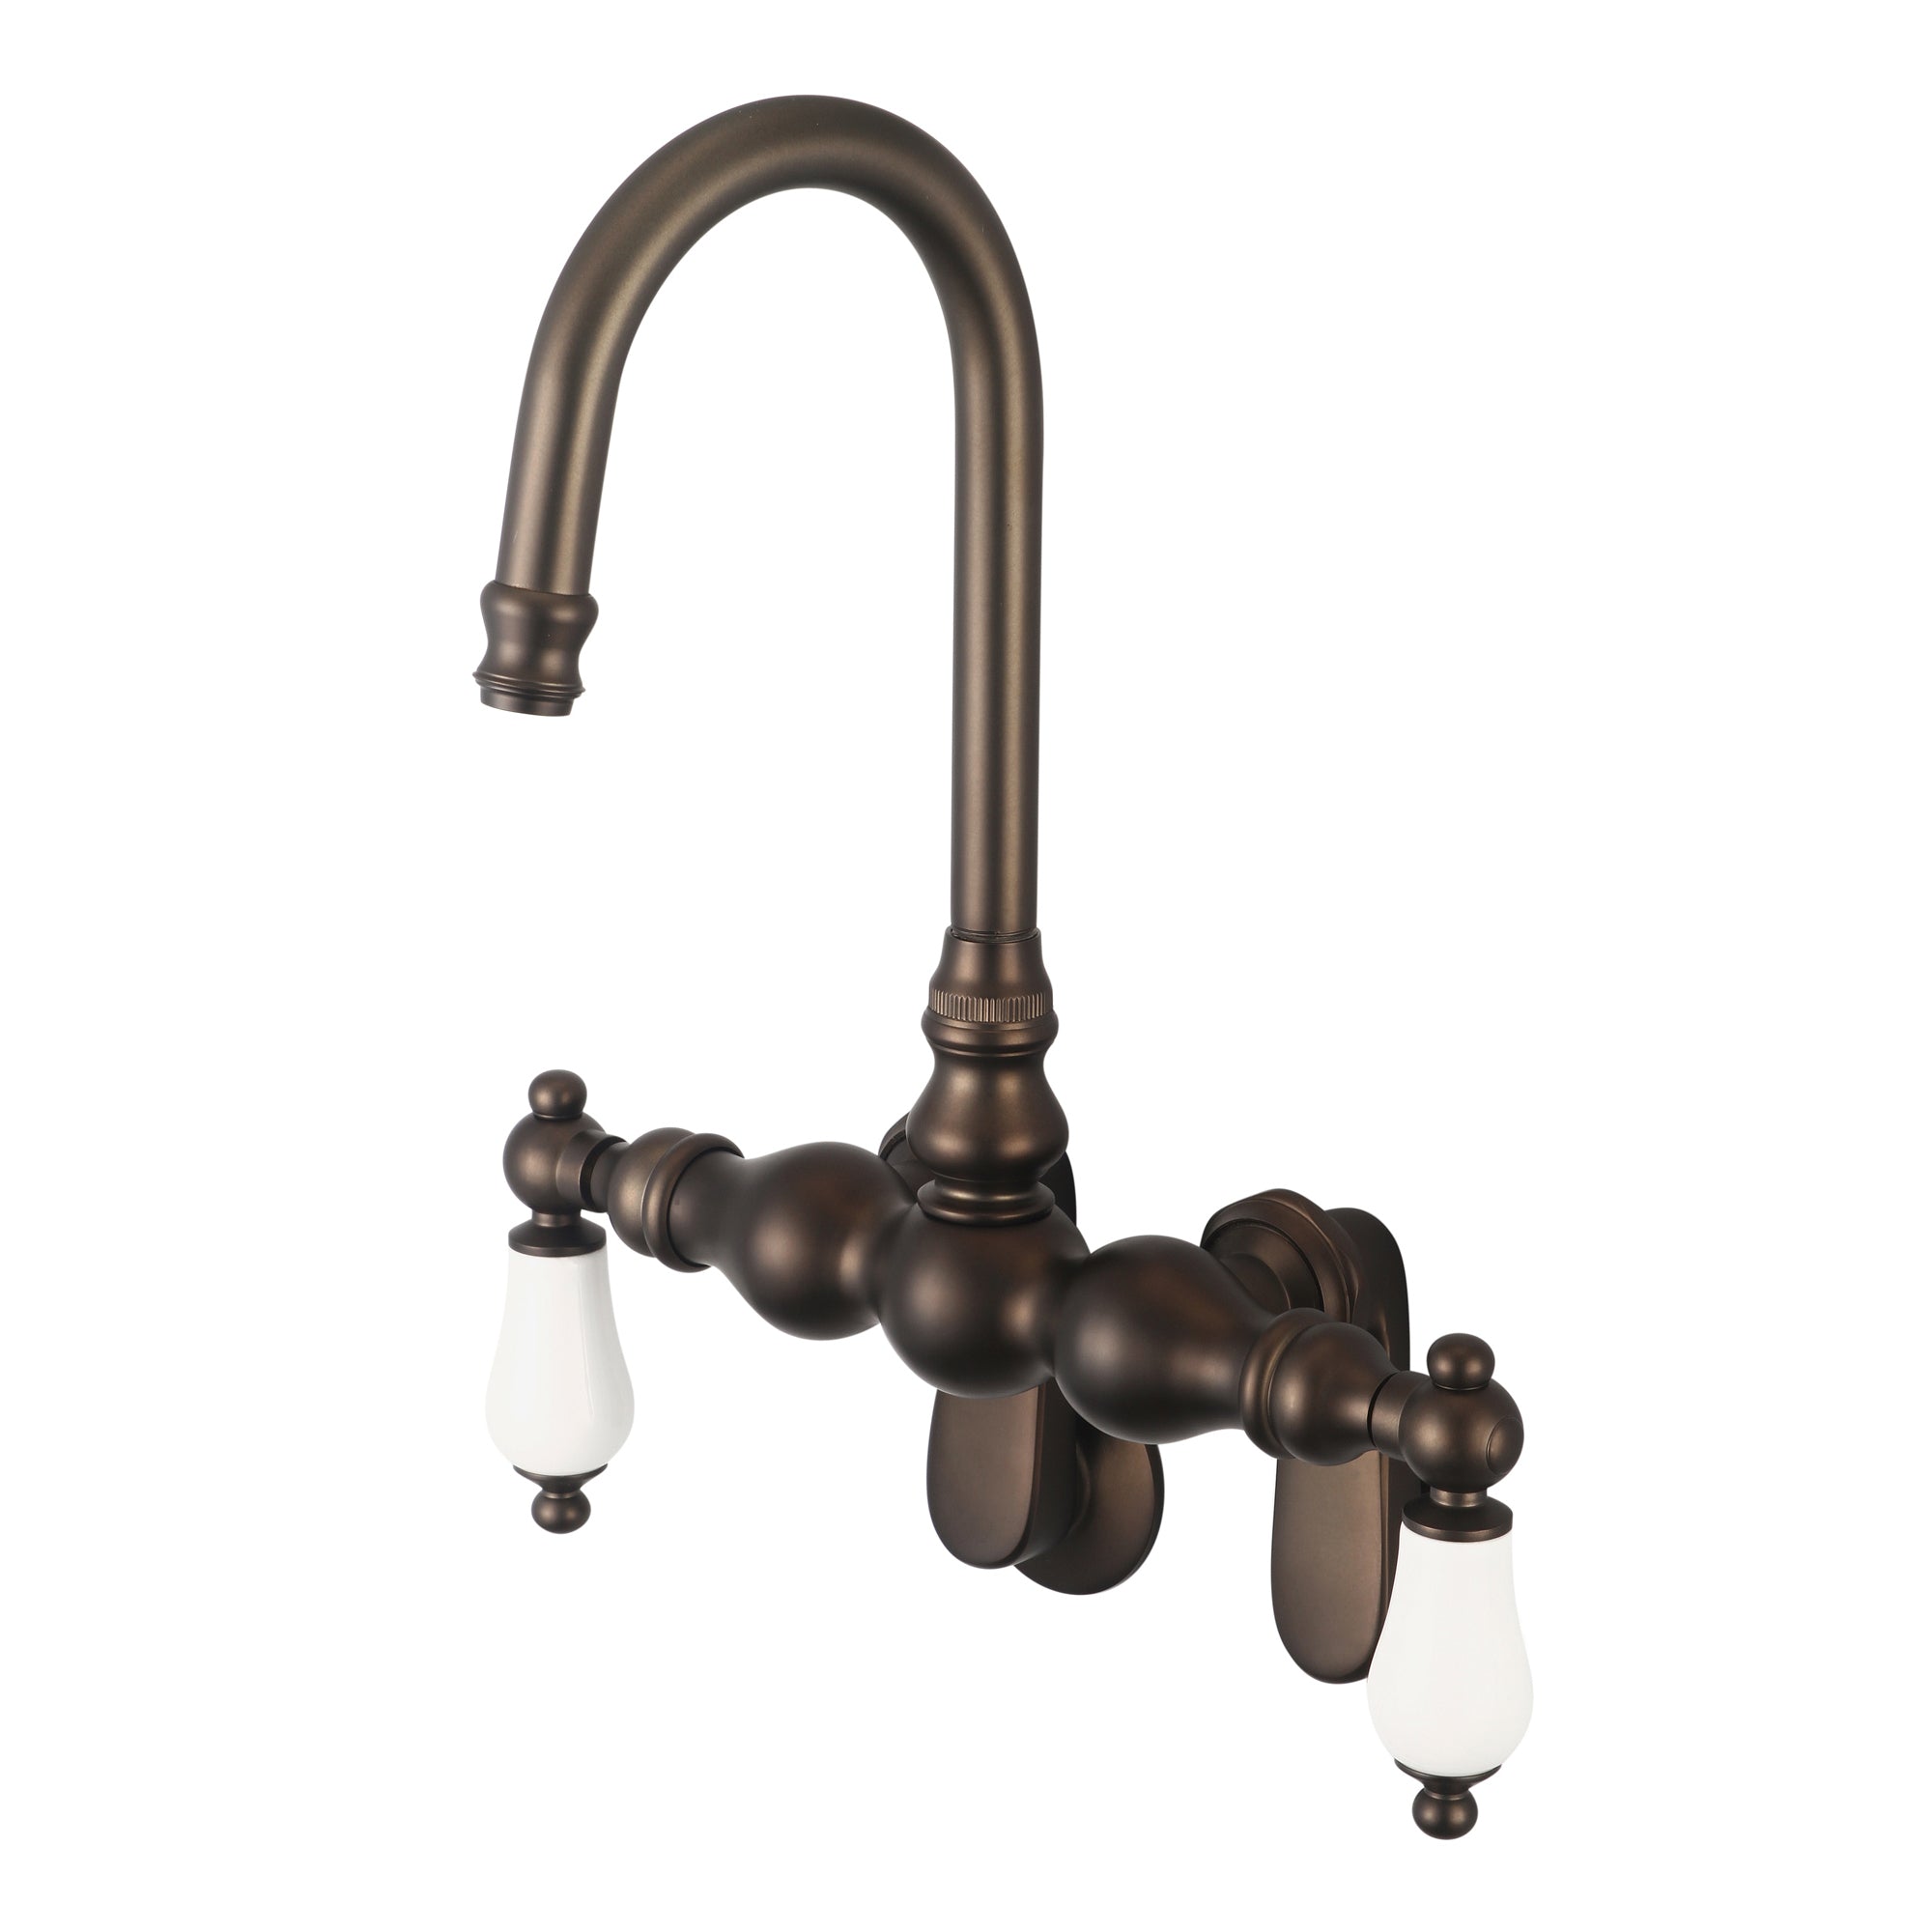 Water Creation | Vintage Classic Adjustable Spread Wall Mount Tub Faucet With Gooseneck Spout & Swivel Wall Connector in Oil-rubbed Bronze Finish Finish With Porcelain Lever Handles Without labels | F6-0015-03-PL